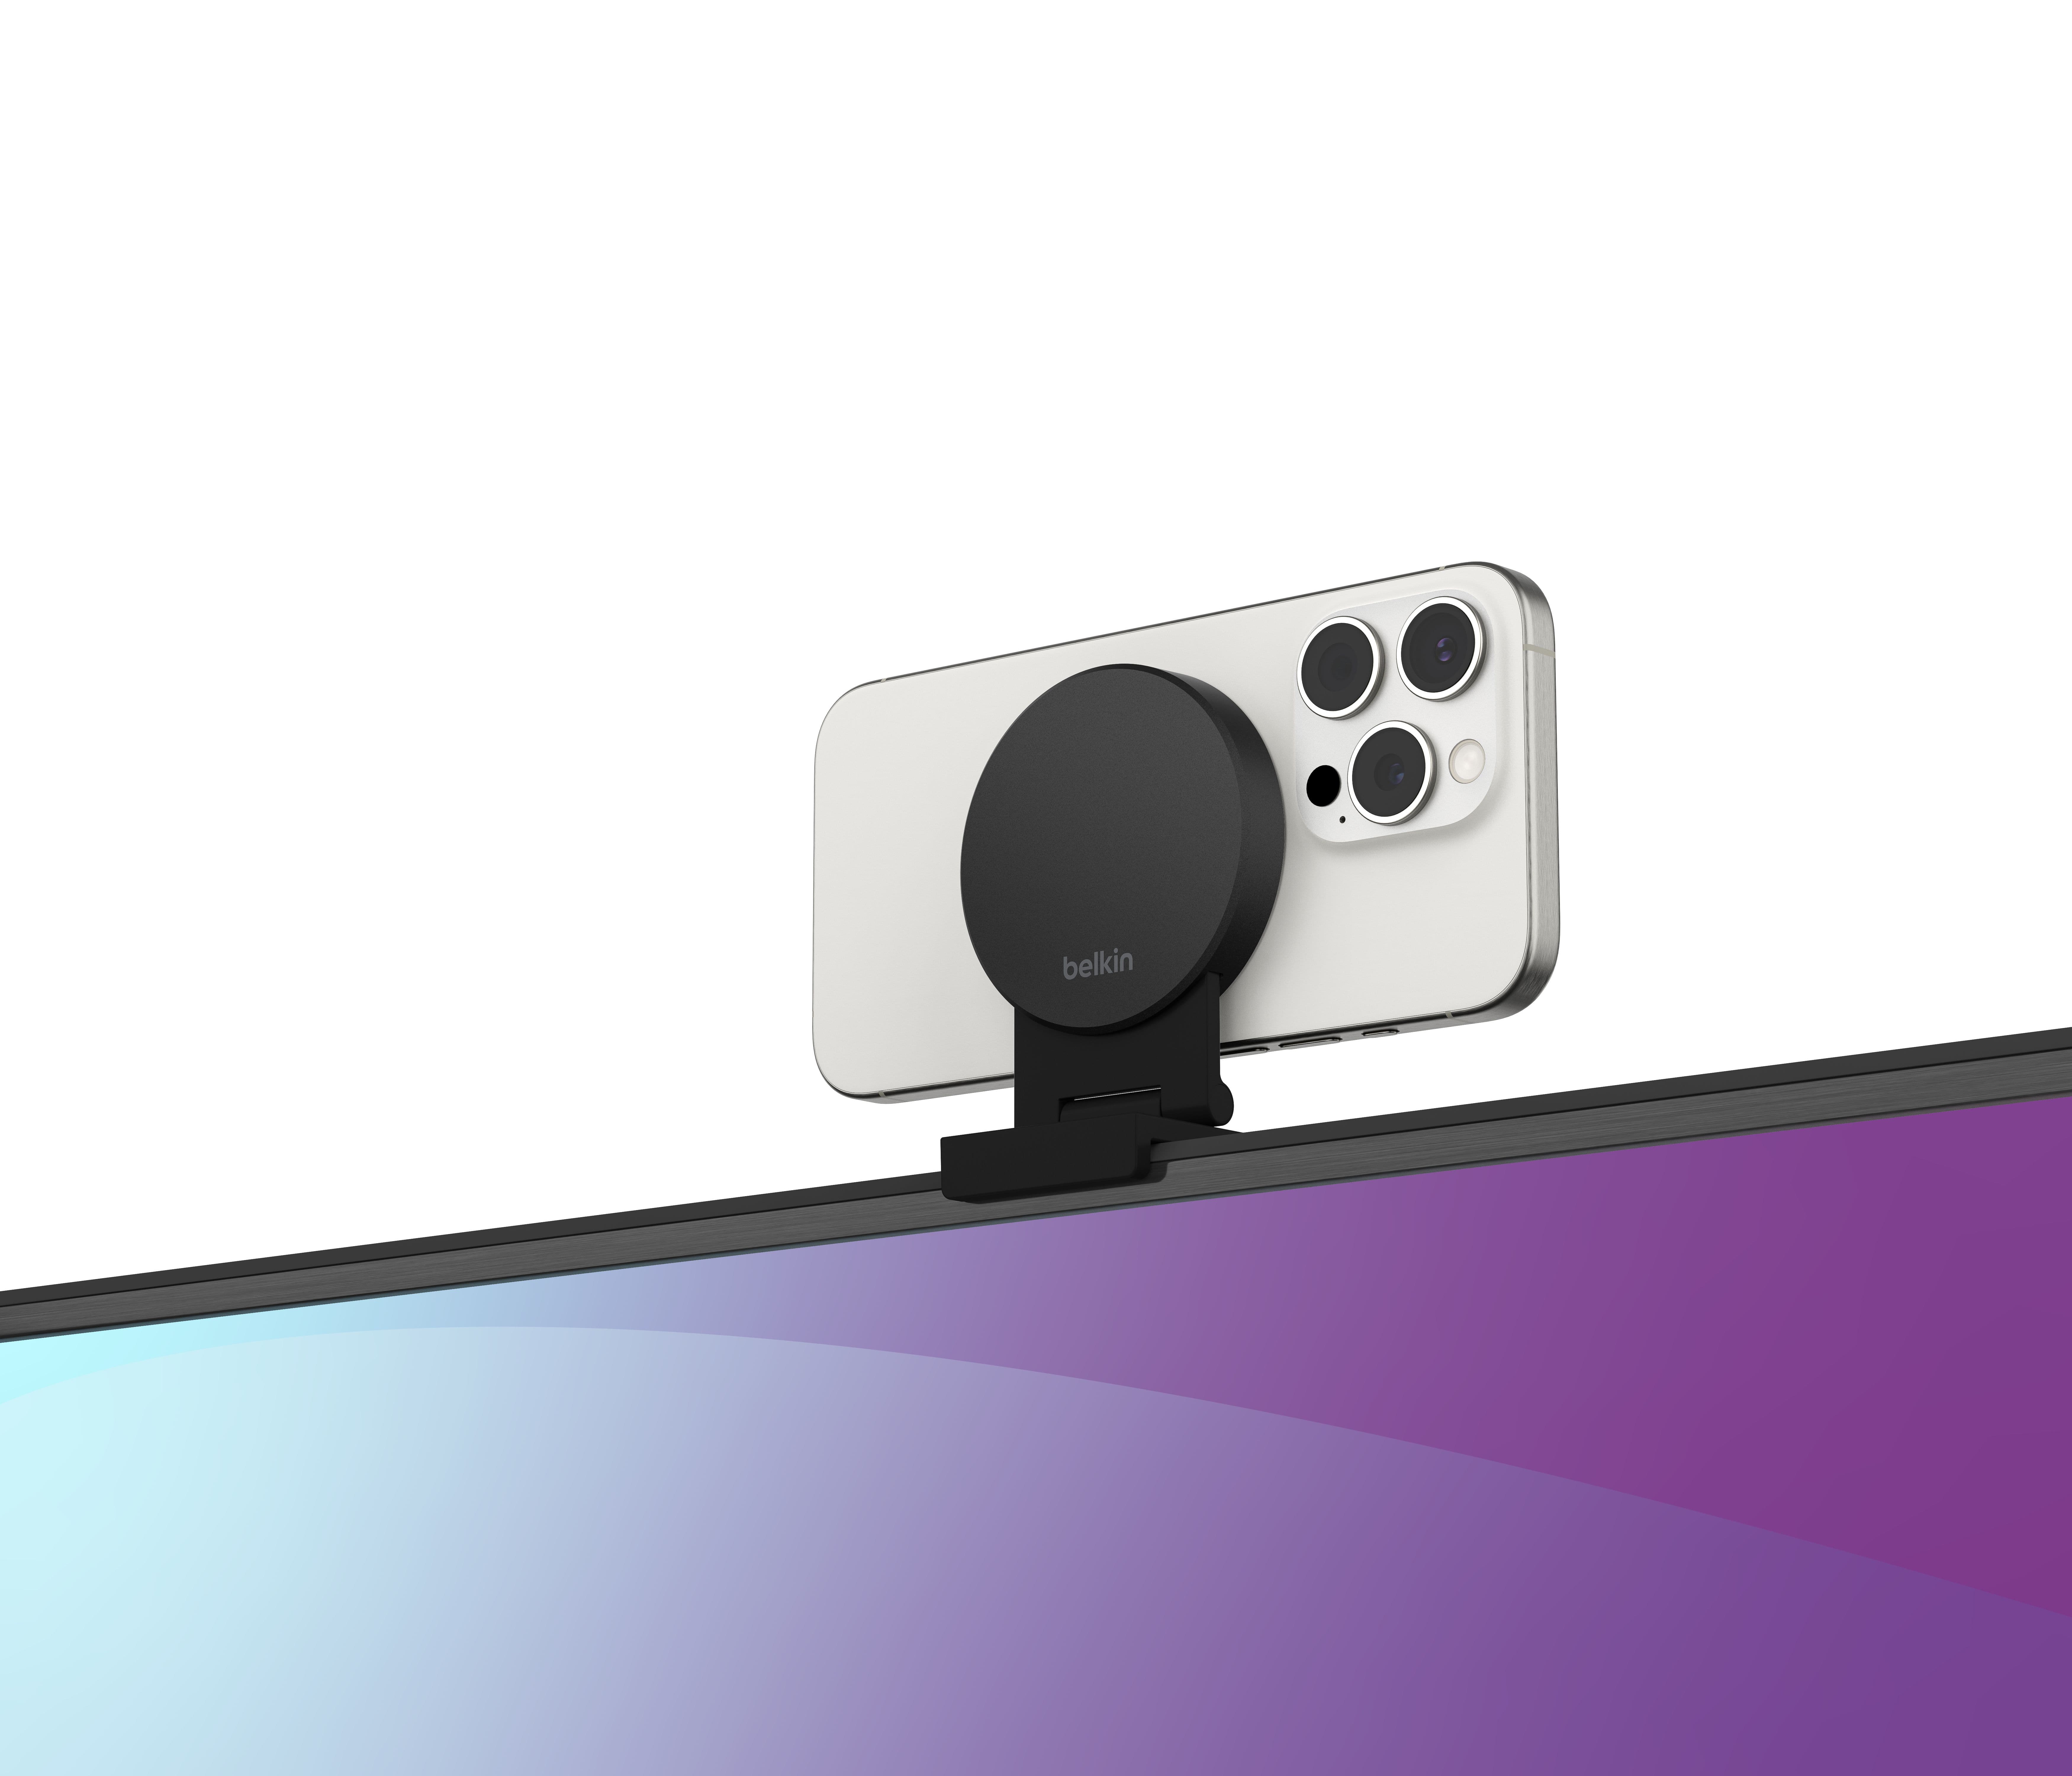 Belkin’s latest product is a Continuity Camera-based iPhone mount for your Apple TV 4K